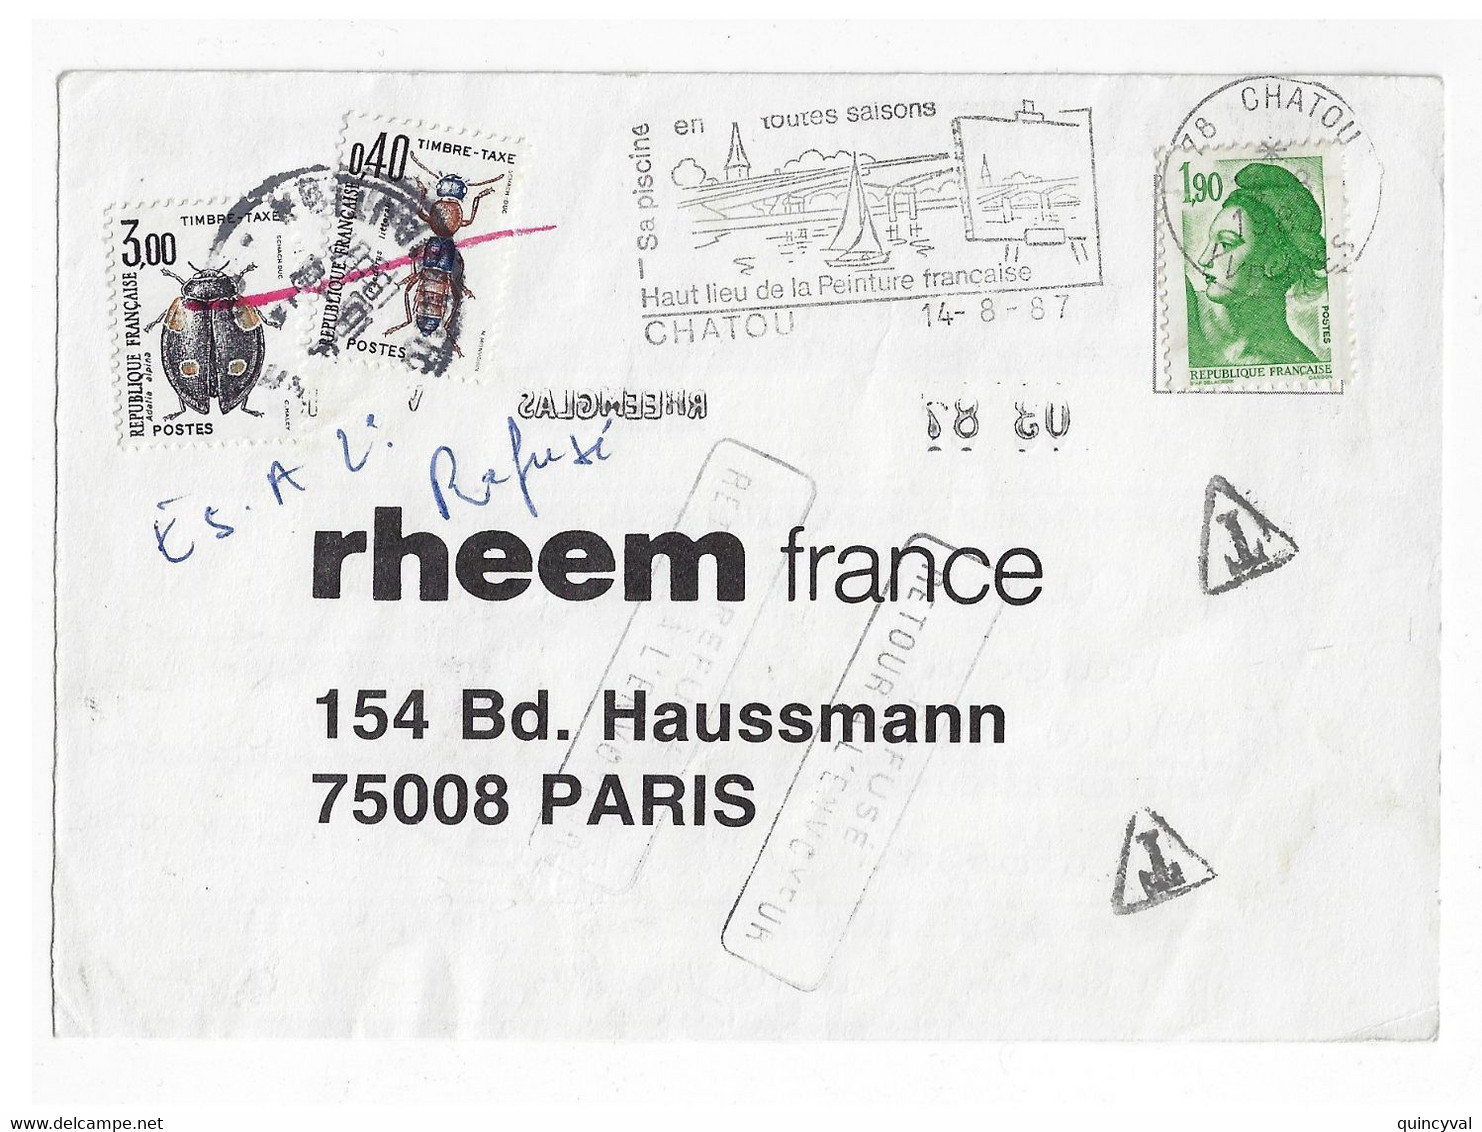 CHATOU 78 Carte Postale Commerciale RHEEM Affranchie Liberté 1,90 F Yv 2424 Ob 1987 TAXE REFUSEE Insectes Yv T 110 111 - 1960-.... Covers & Documents